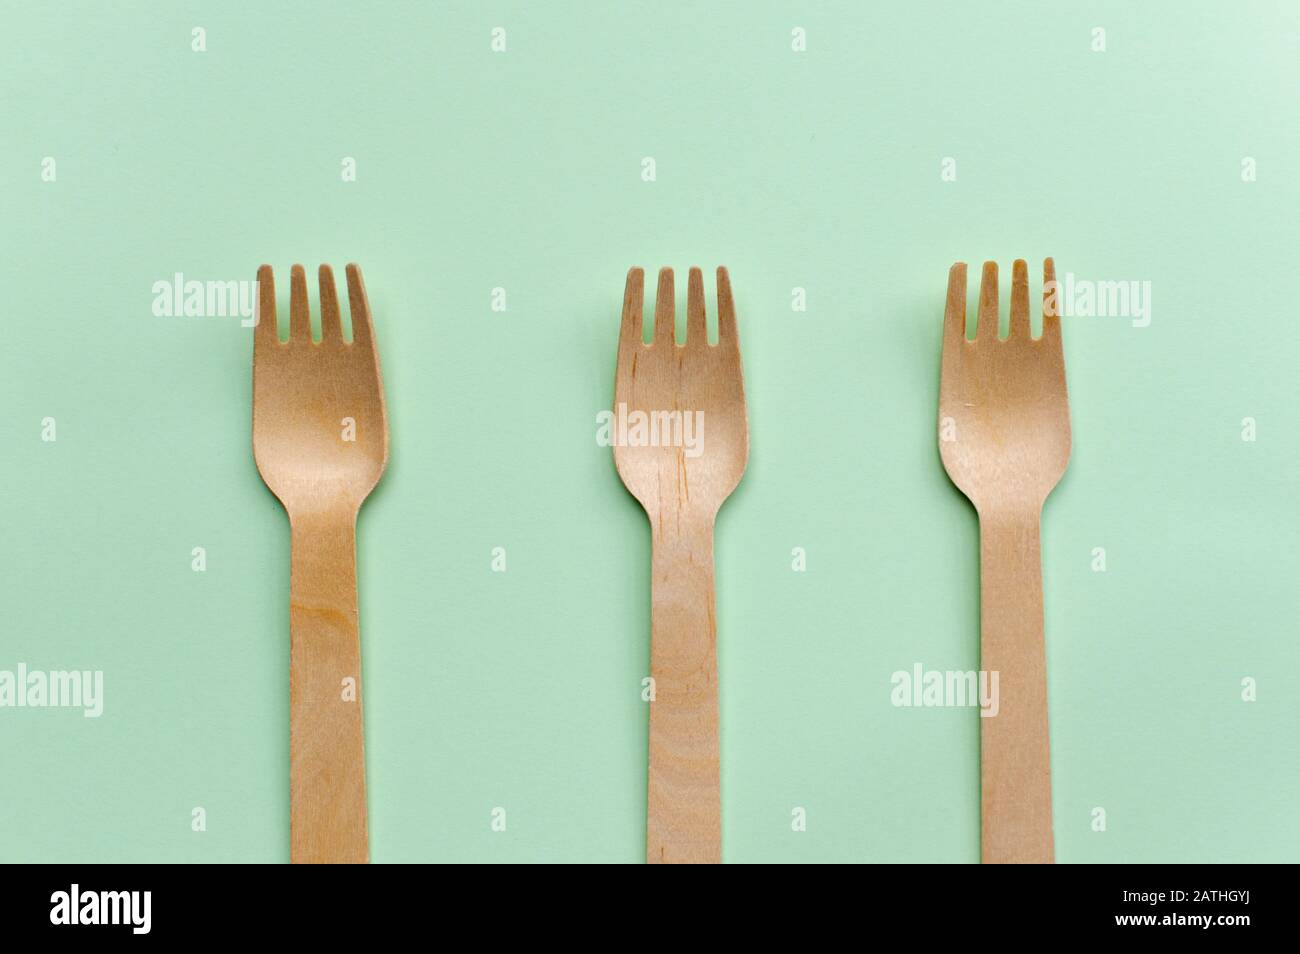 https://c8.alamy.com/comp/2ATHGYJ/three-single-use-wooden-fork-on-a-green-background-environment-friendly-concept-2ATHGYJ.jpg